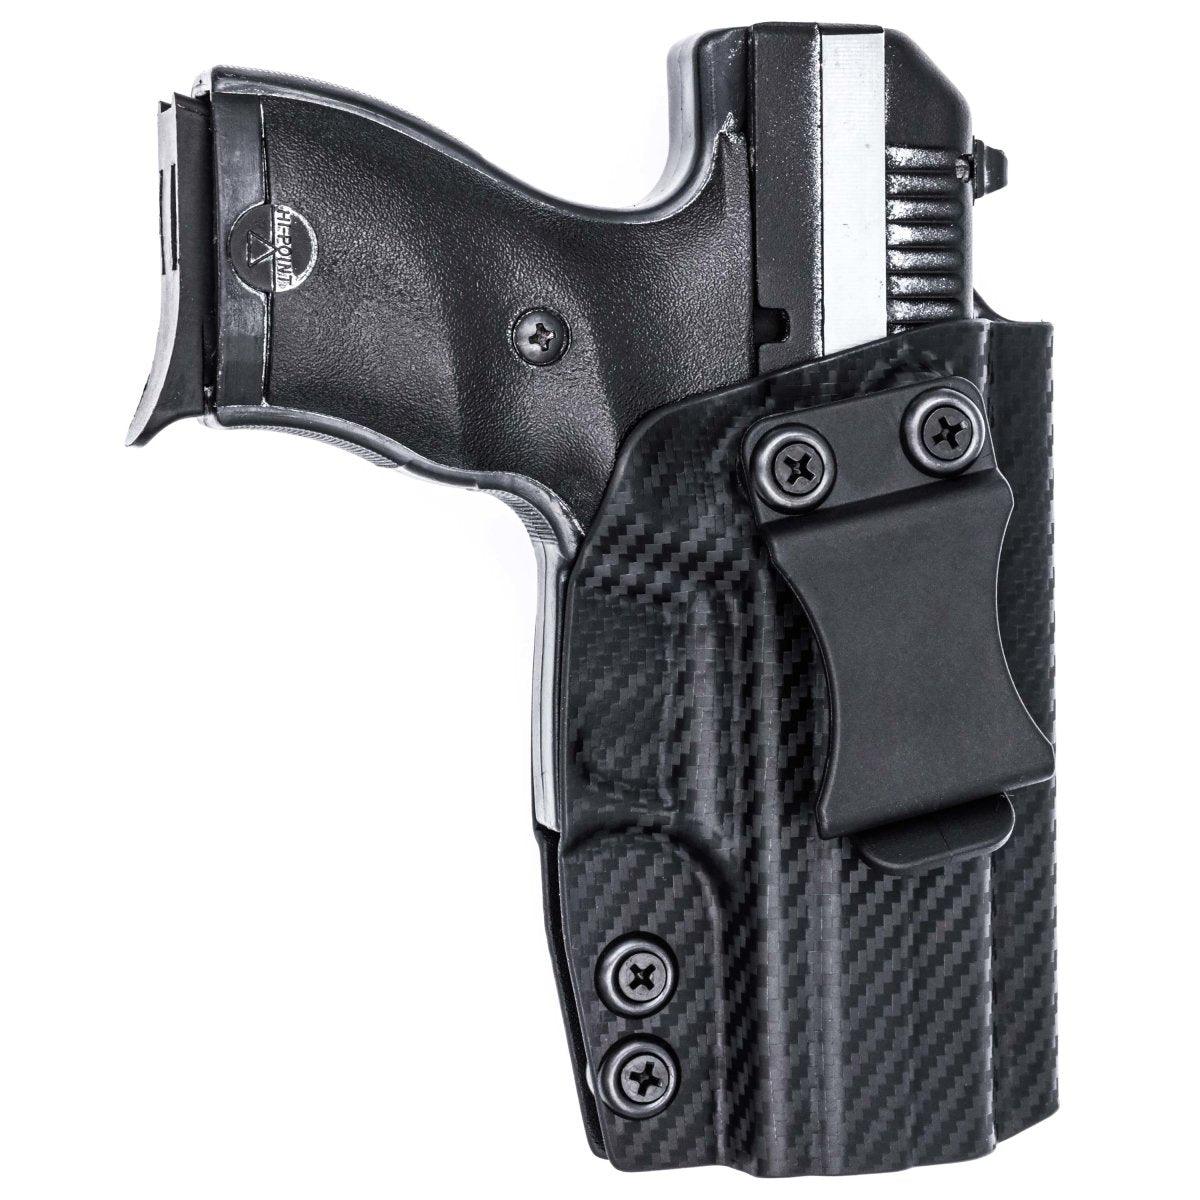 C9 HOLSTERS